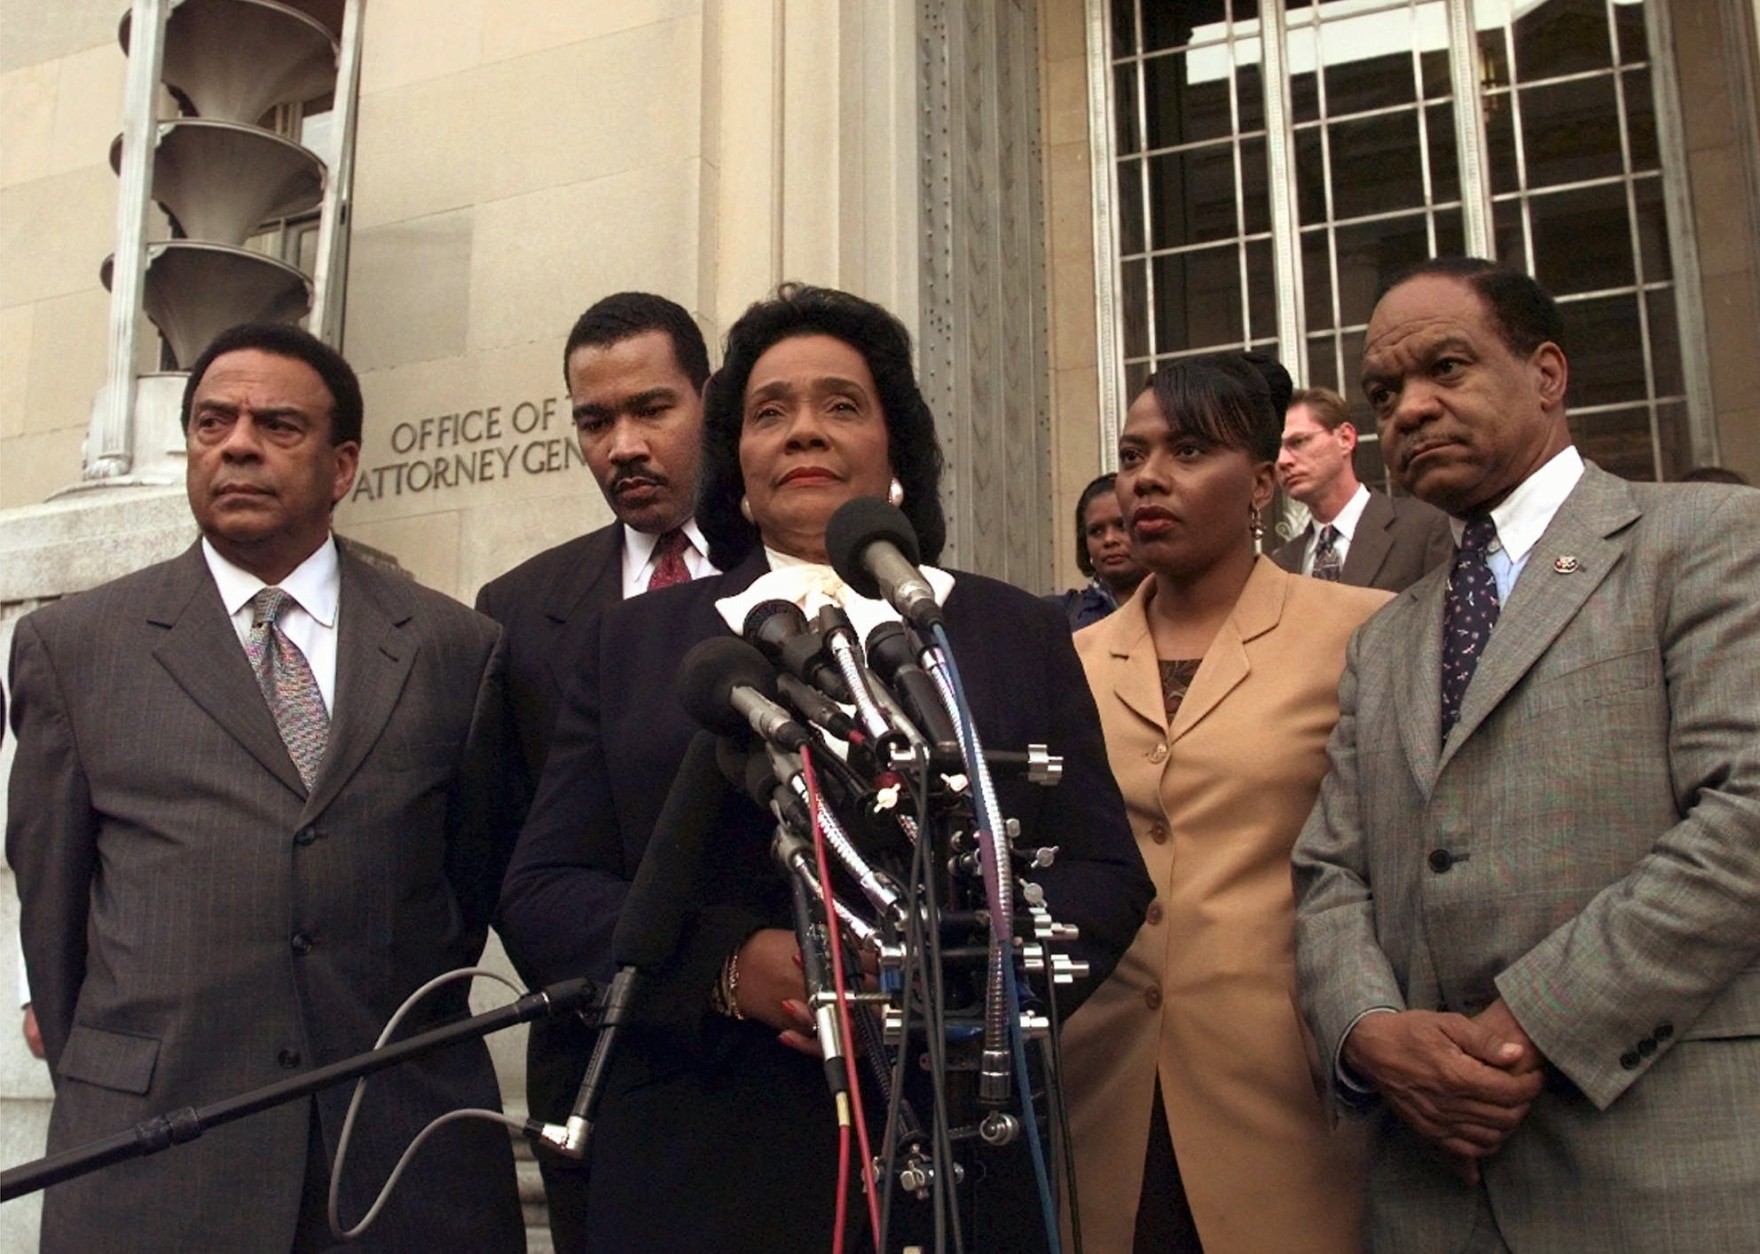 Coretta Scott King, center, widow of slain civil rights leader Dr. Martin Luther King Jr., talks to reporters outside of the Justice Department, Wednesday, April 8, 1998, in Washington after meeting with Attorney General Janet Reno.  Mrs. King is flanked by former U. N. Ambassador Andrew Young, far left; her son Dexter; her daughter, The Rev. Bernice King; and Washington, D.C. Congressional Delegate Walter Fauntroy, right. Mrs. King told reporters she had presented new evidence about the 1968 assassination of her husband.    (AP Photo/Wilfredo Lee)